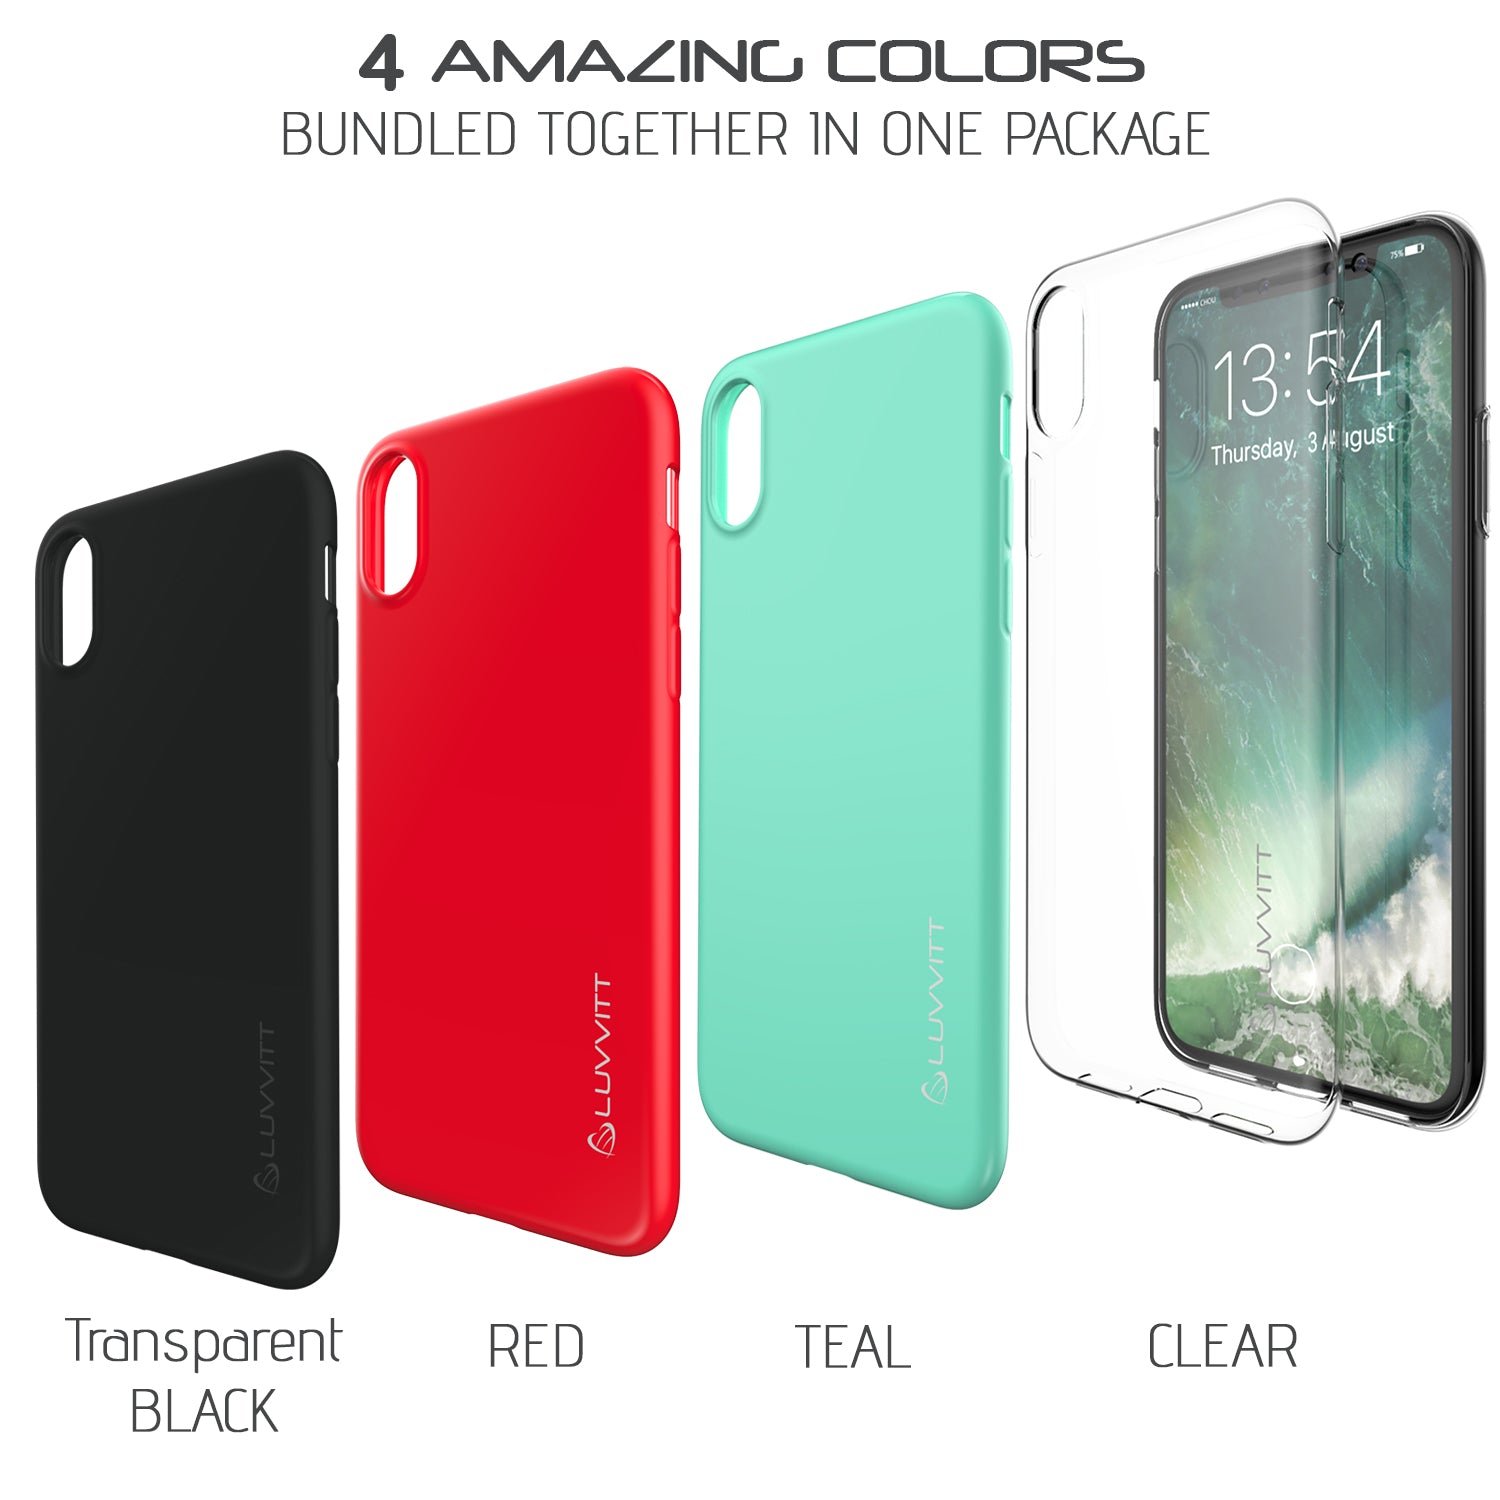 Luvvitt Clarity Case for iPhone XS / X Slim Flexible TPU Rubber - 4 Pack Bundle